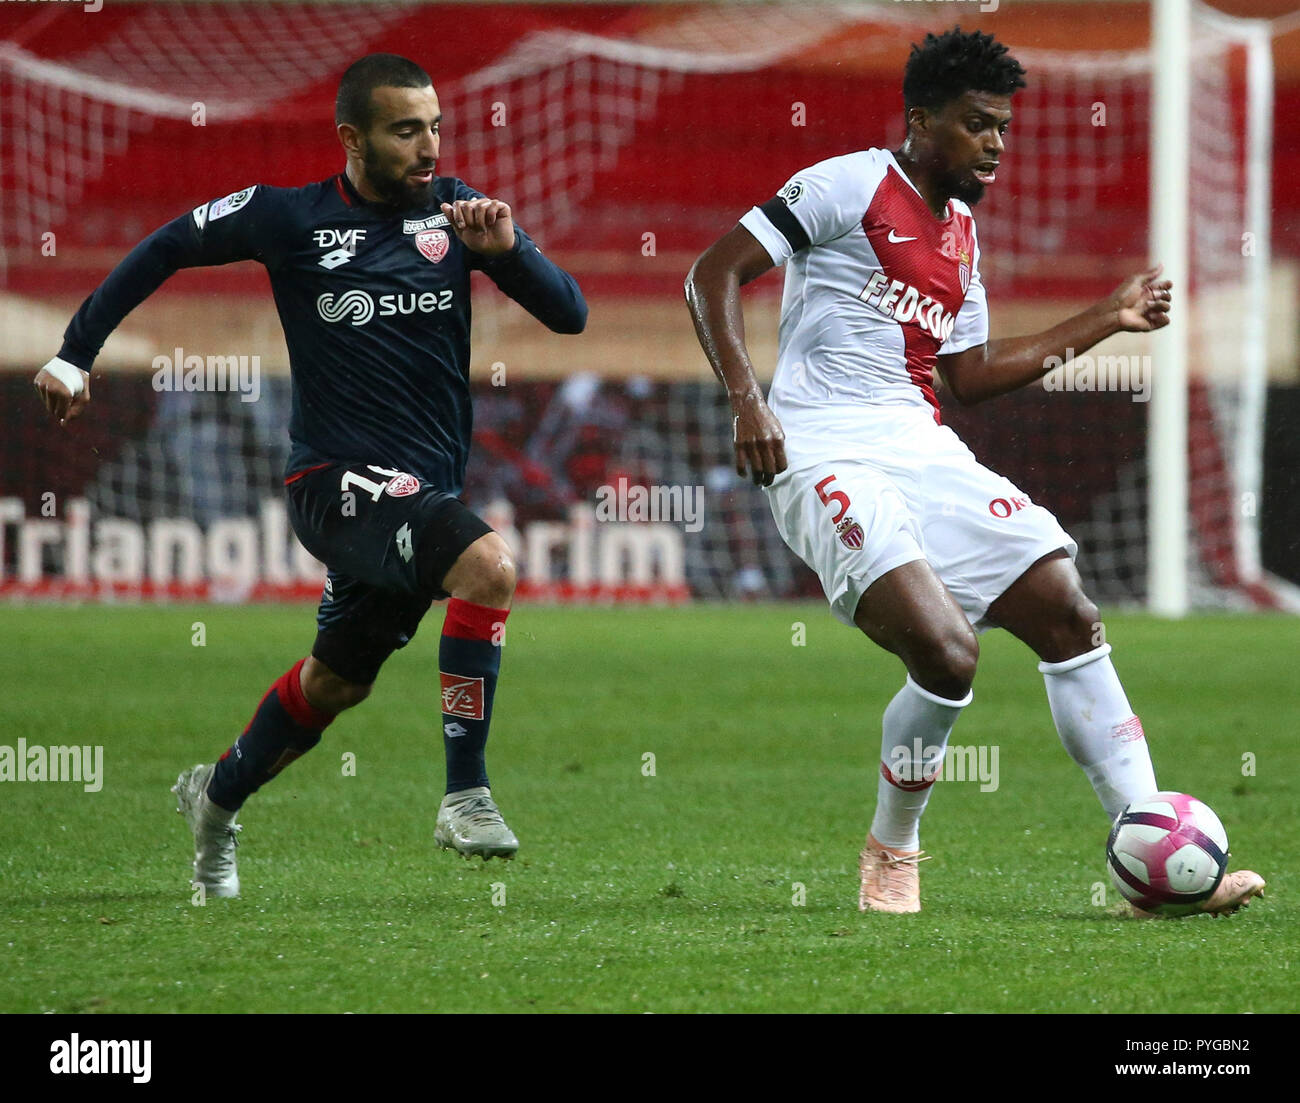 Fontvieille, Monaco. 27th Oct, 2018. Jemerson (R) of Monaco vies with Naim Sliti of Dijon during the 2018-2019 French Ligue 1 match between Monaco and Dijon in Fontvieille, Monaco, Oct. 27, 2018. The match ended with a 2-2 draw. Credit: Serge Haouzi/Xinhua/Alamy Live News Stock Photo